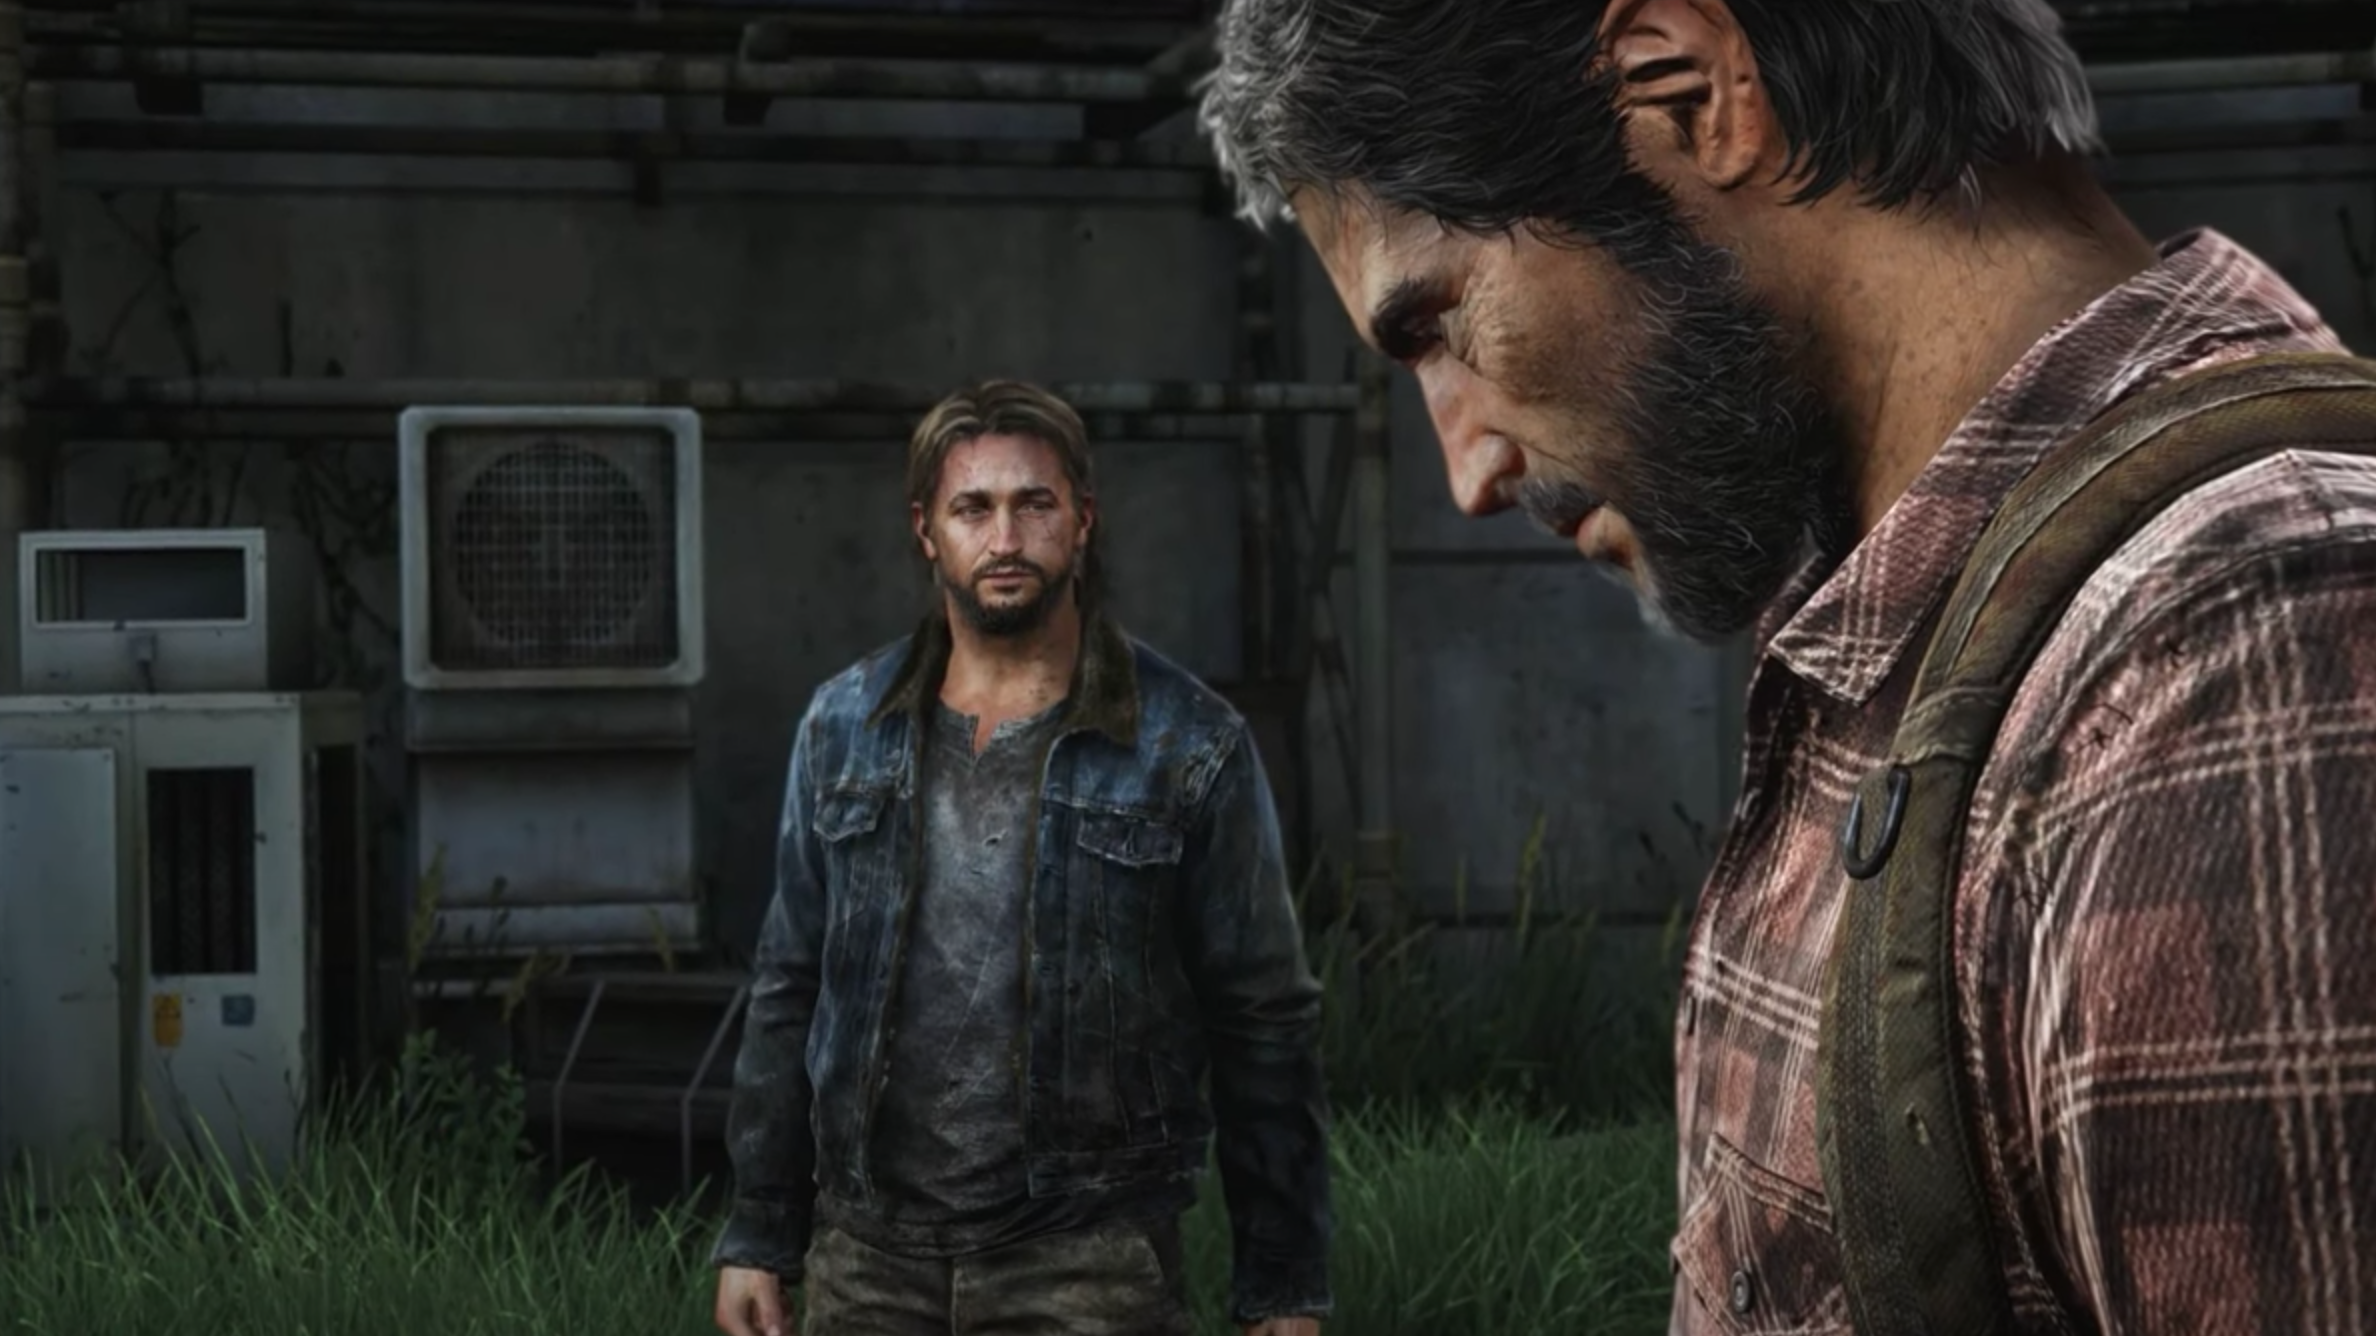 The Last of Us - Joel Reunites With His Brother Tommy & Meets His